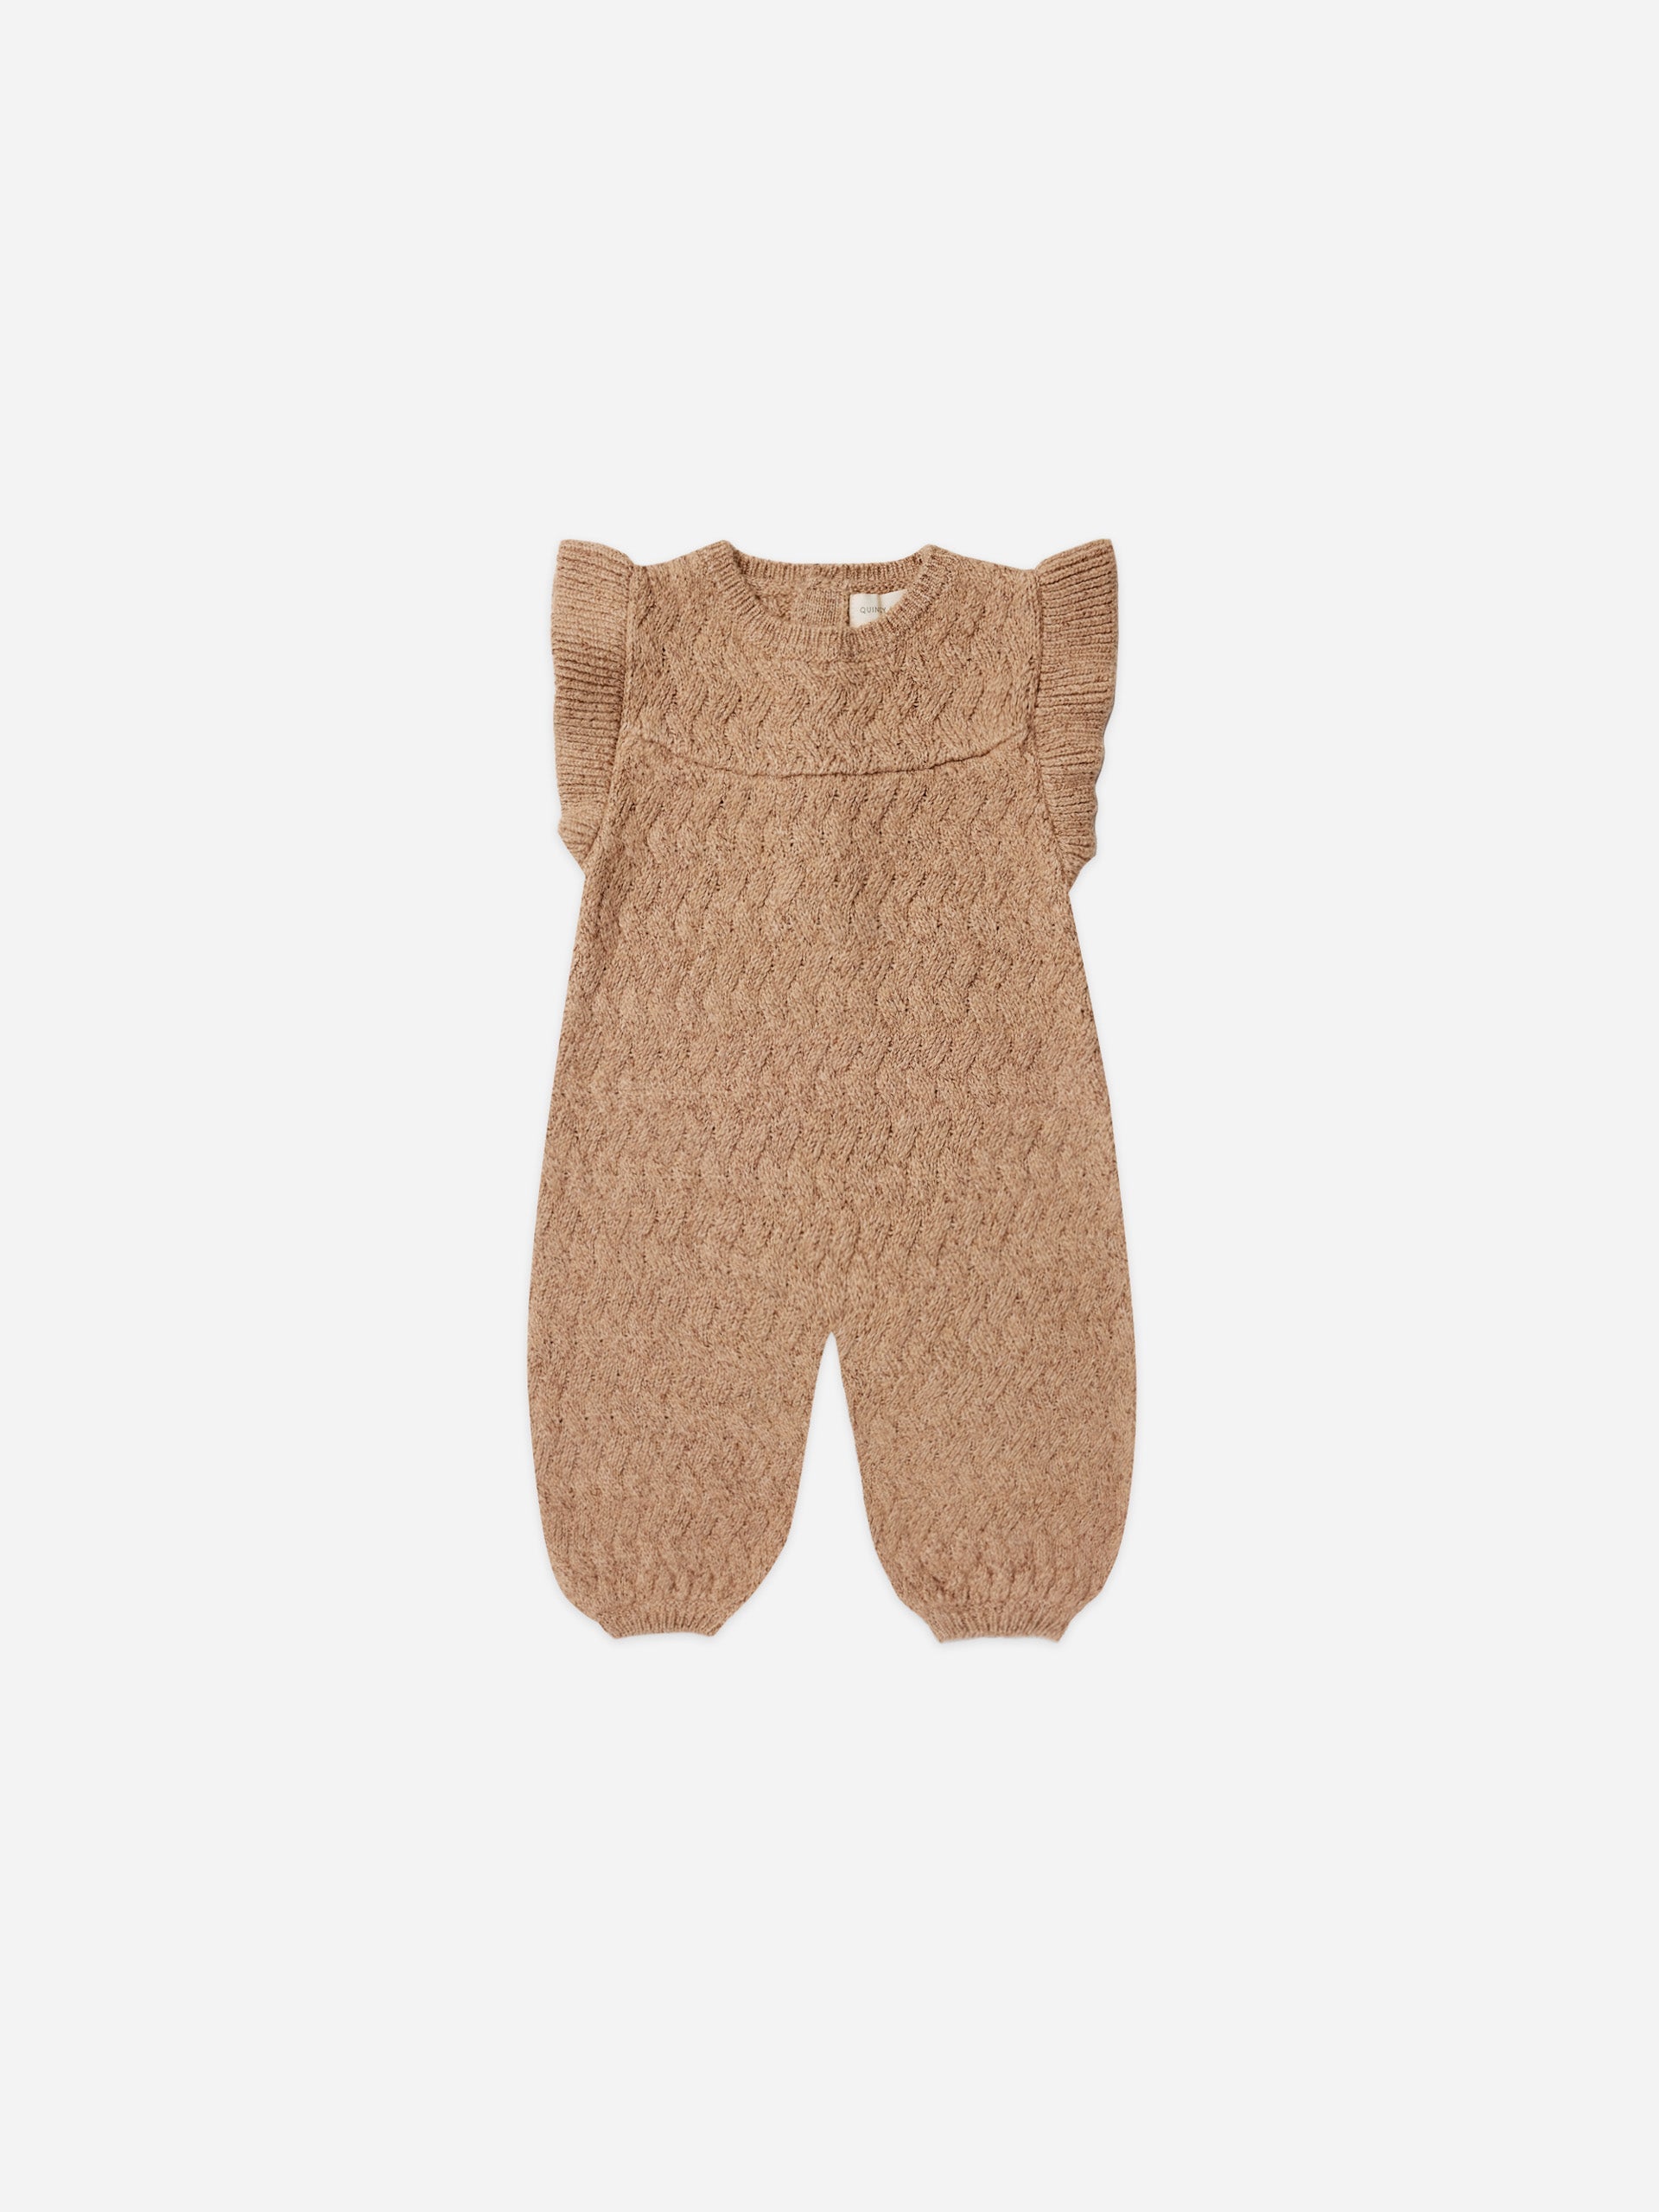 mira knit romper | heathered apricot - Quincy Mae | Baby Basics | Baby Clothing | Organic Baby Clothes | Modern Baby Boy Clothes |